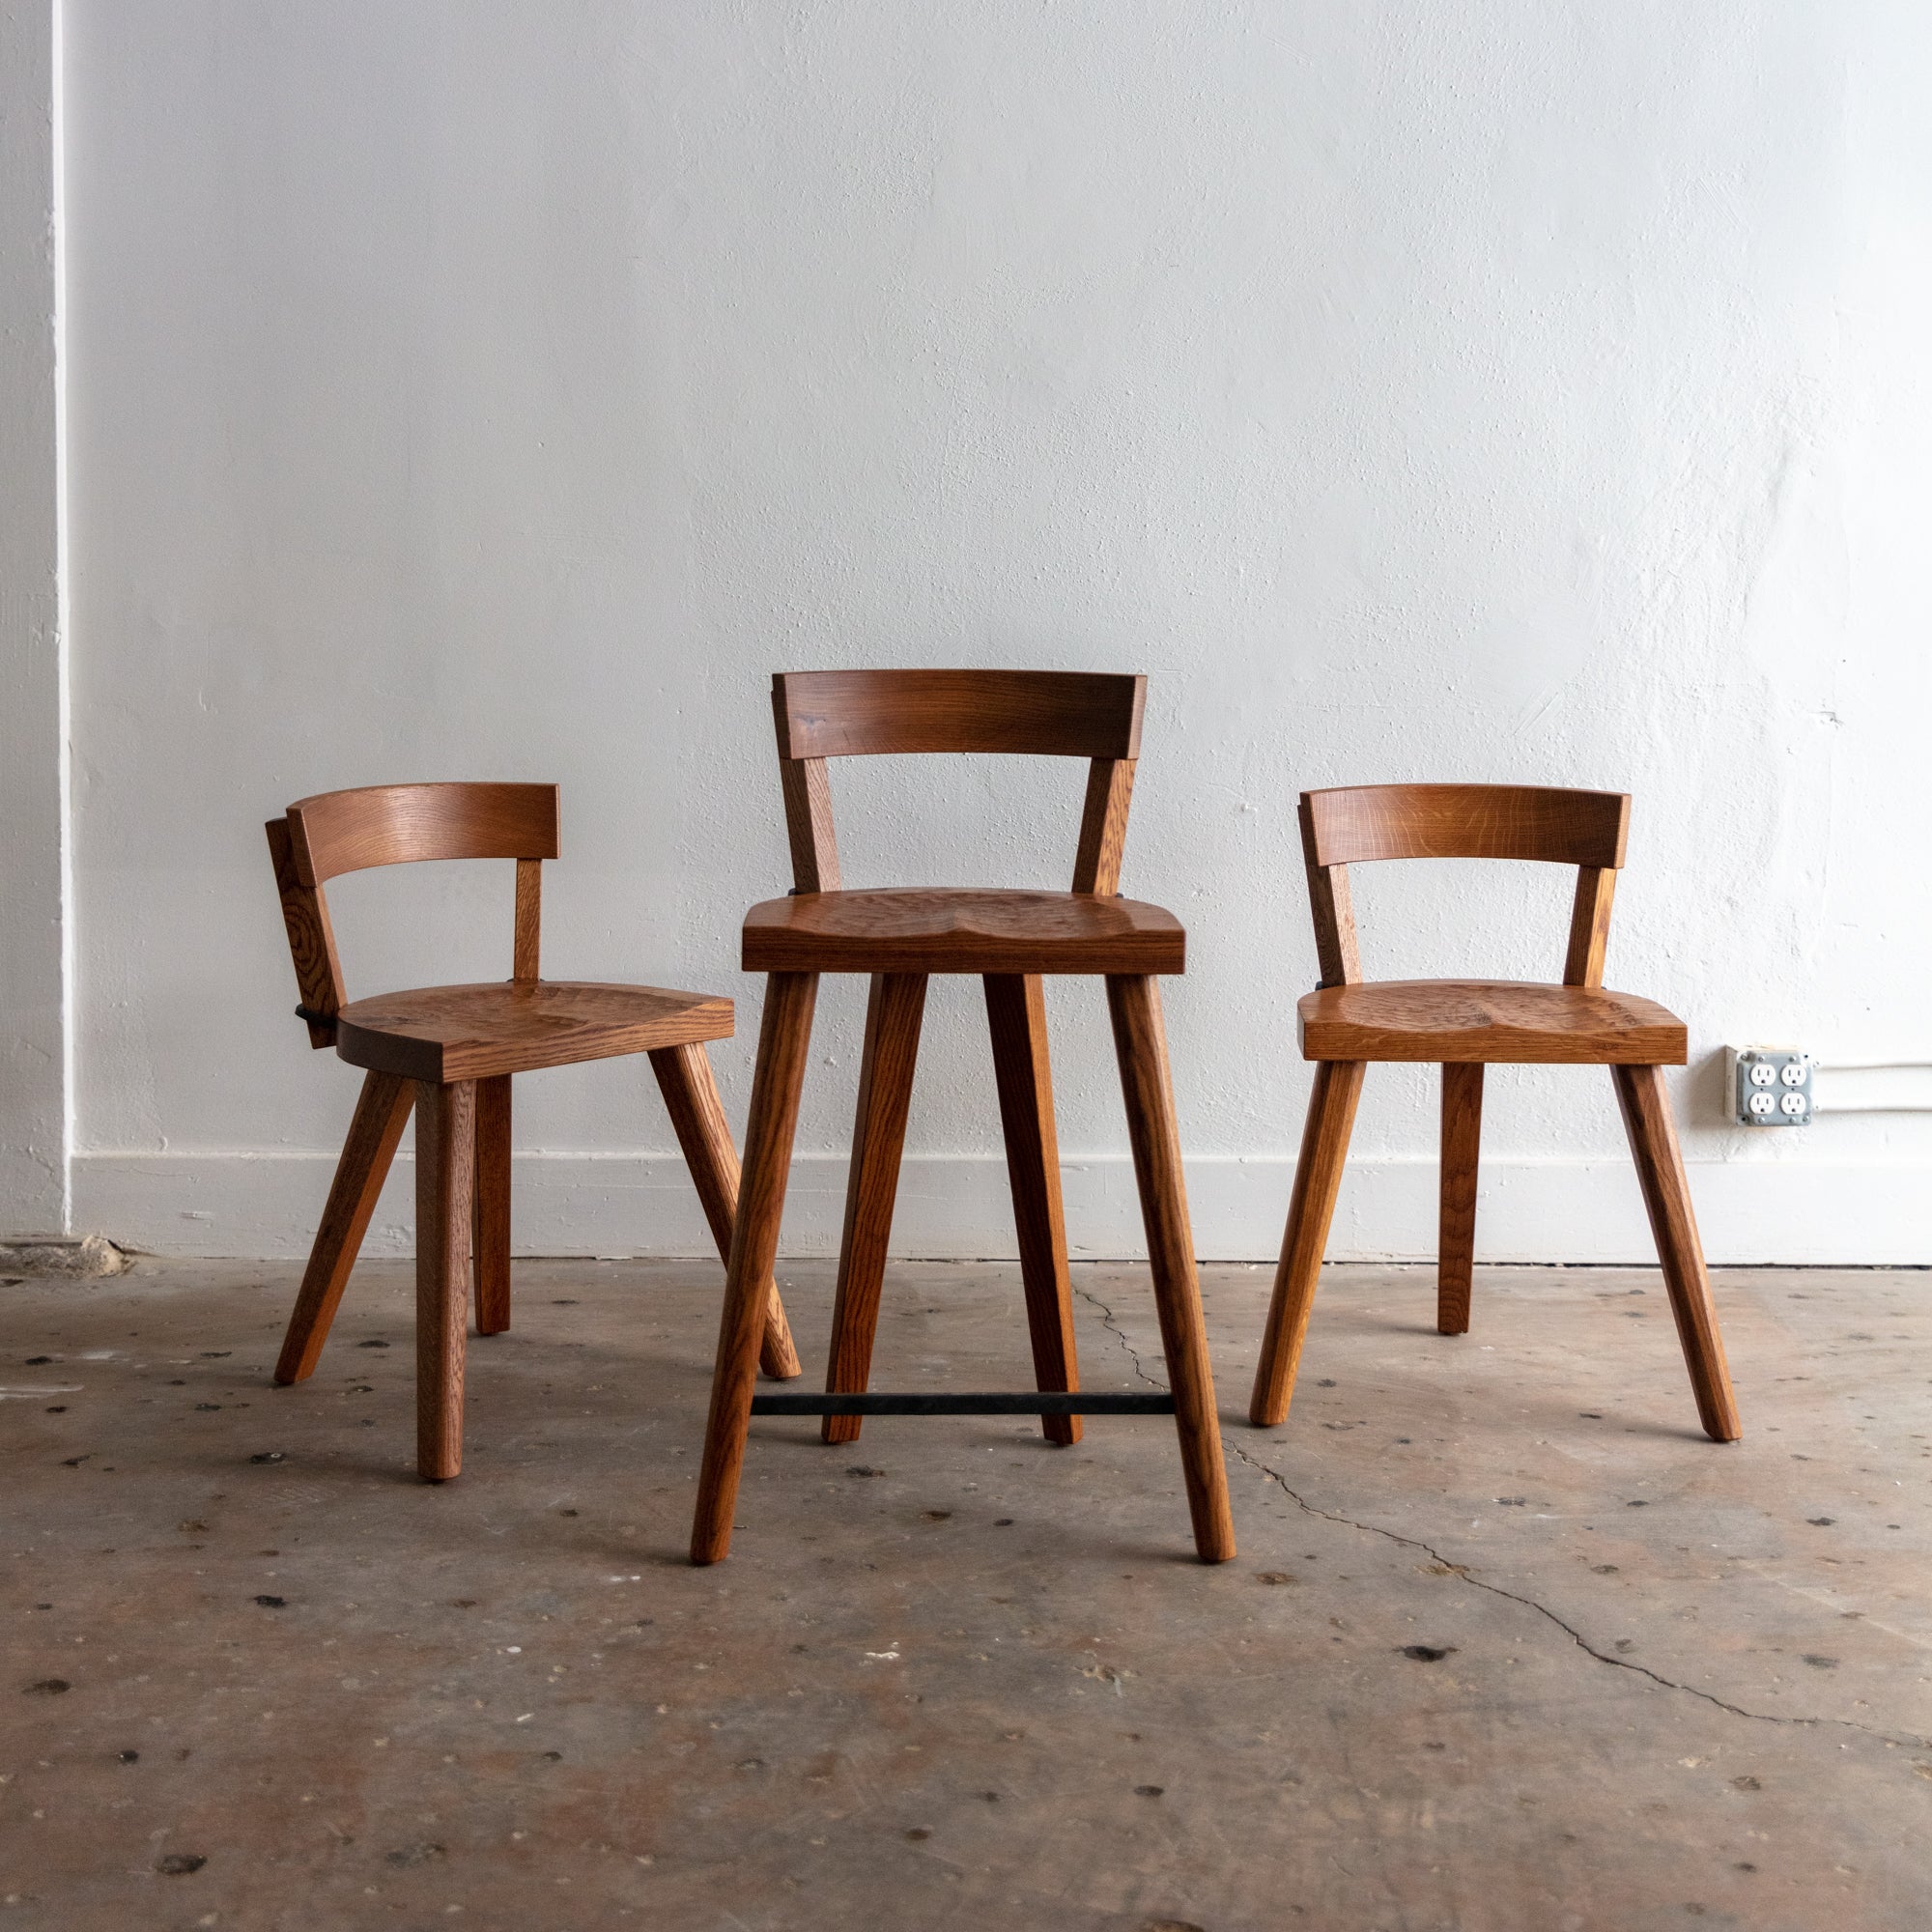 The Marolles Counter Stool